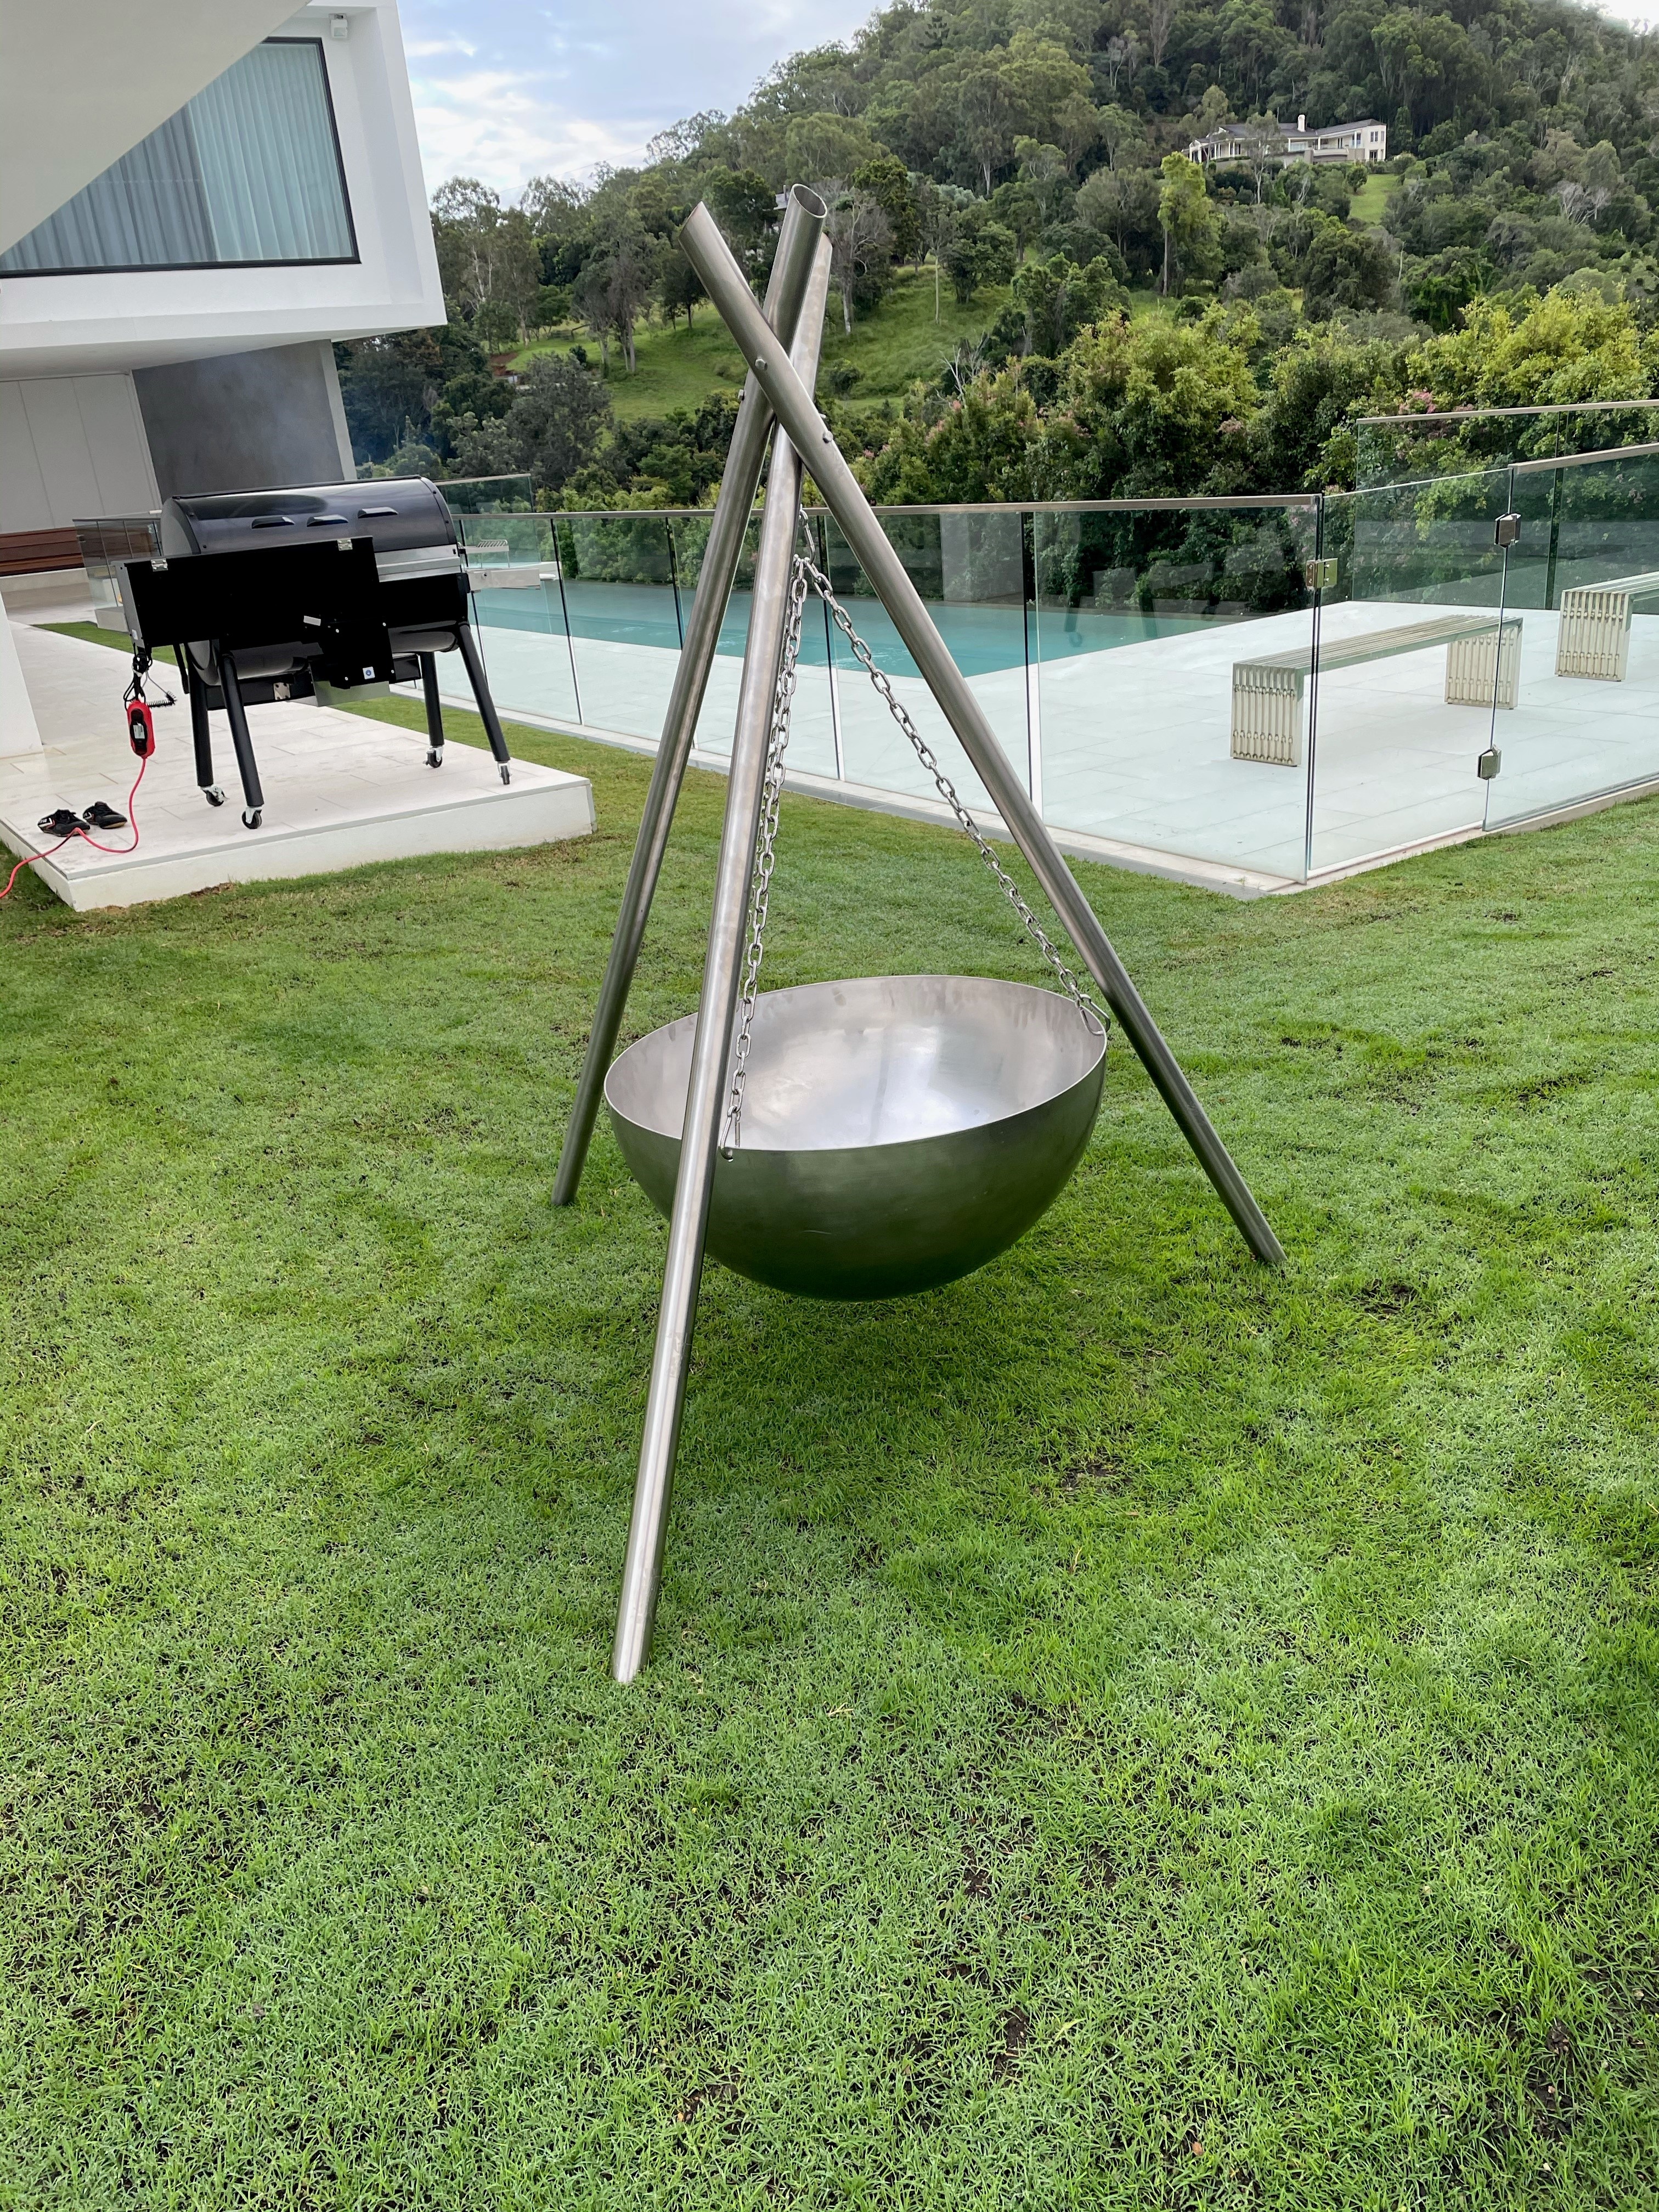 THE STAINLESS STEEL TRIPOD FIRE PIT + FREE Stainless Steel Cooking Grill